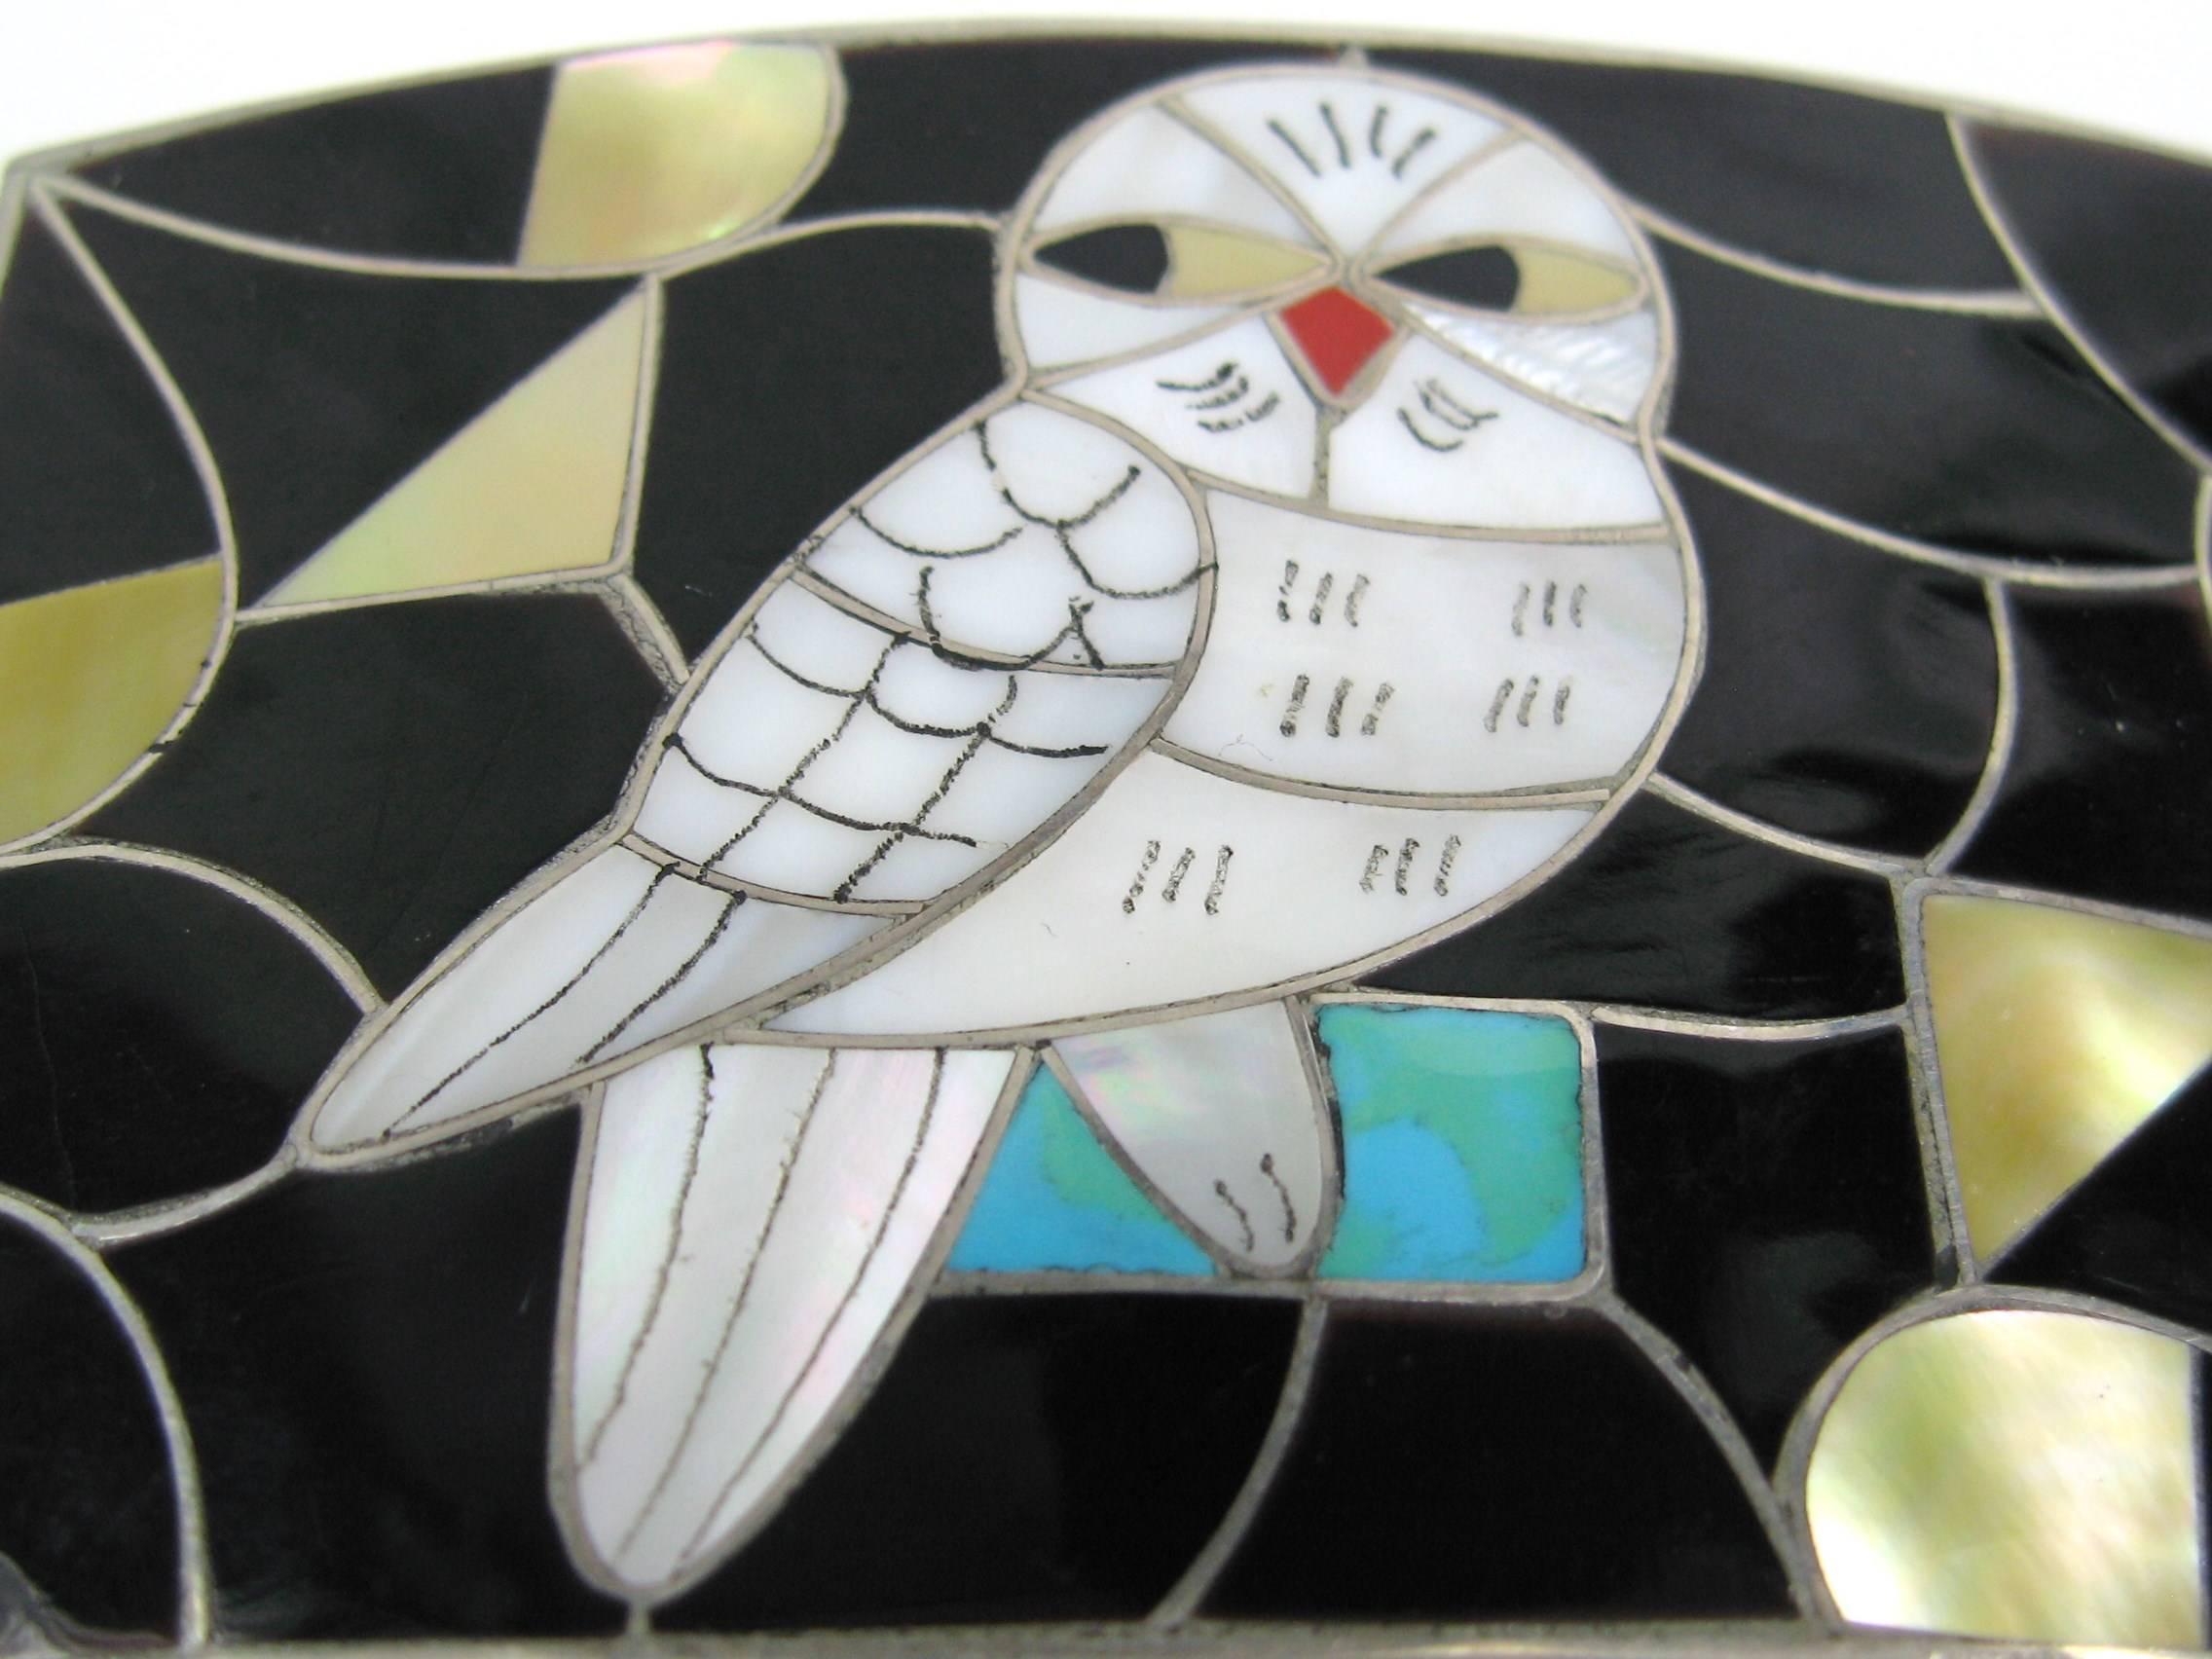 Stunning Zuni Belt Buckle This is a fantastic vintage Native American handmade buckle featuring a wonderful OWL. The inlay work is amazing! Artists Porfilio and Ann Sheyka. Porfilio and Anne are known for their animal designs and this is among the